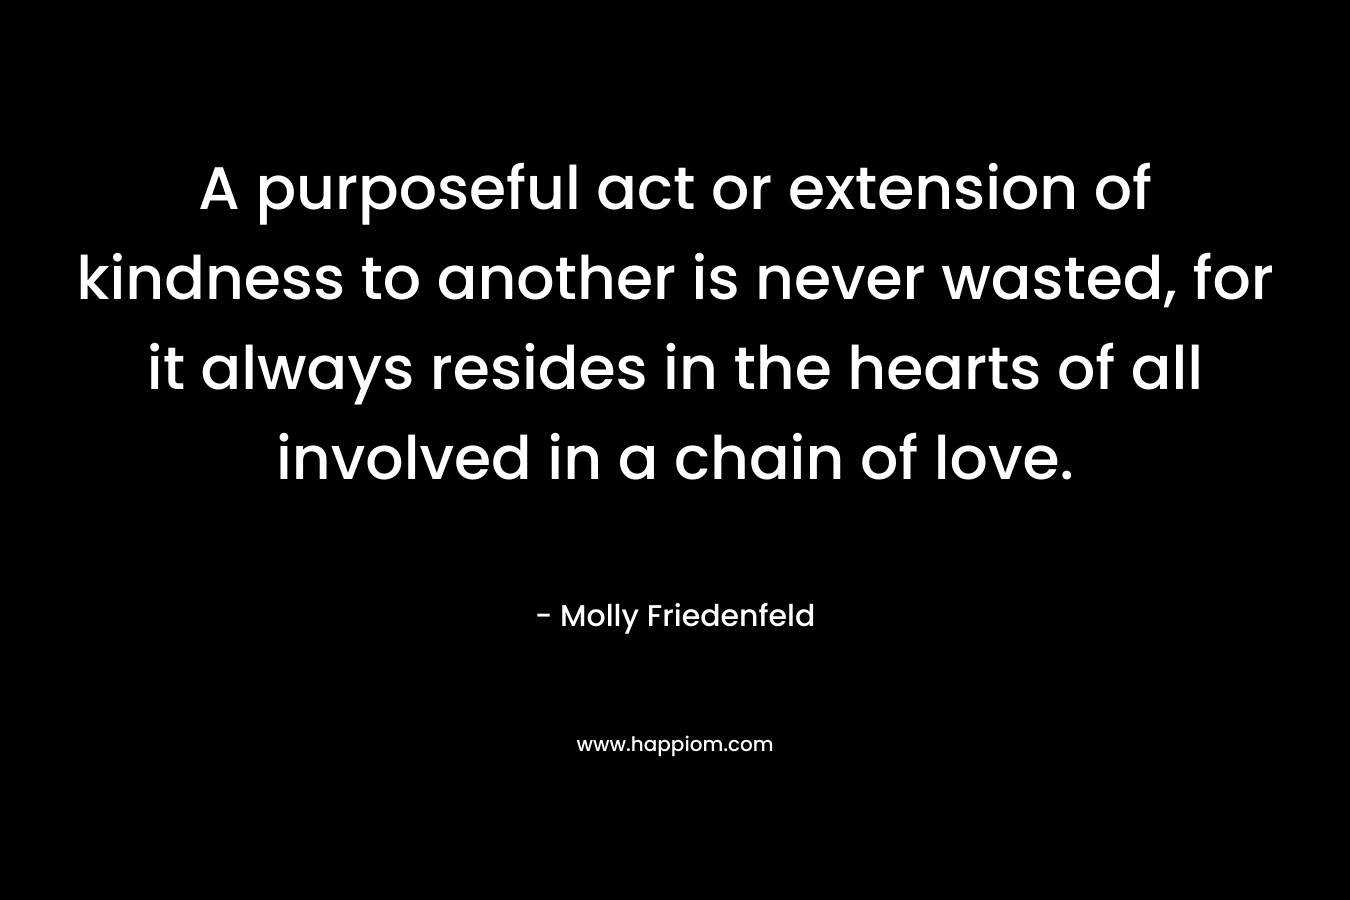 A purposeful act or extension of kindness to another is never wasted, for it always resides in the hearts of all involved in a chain of love.